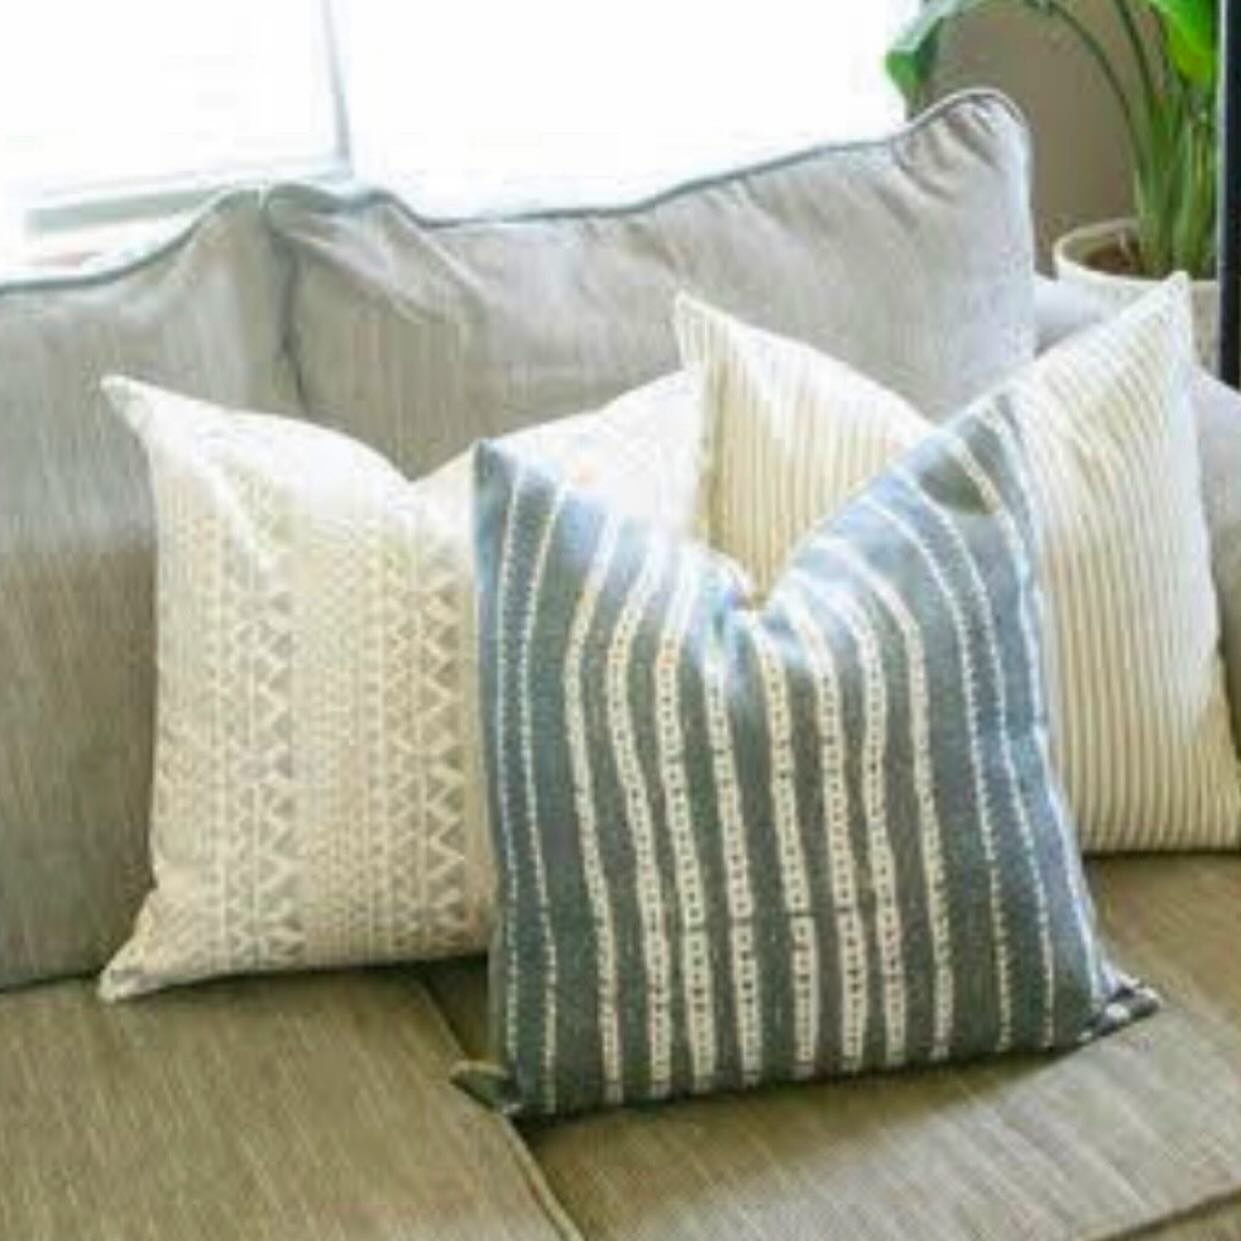 Pillows are one of the easiest ways to freshen up your room. We like to change out our pillows for each season. Think warmer tones for the winter, cooler for the summer, fall tones and of course Christmas. 
Do you keep the same pillows throughout the